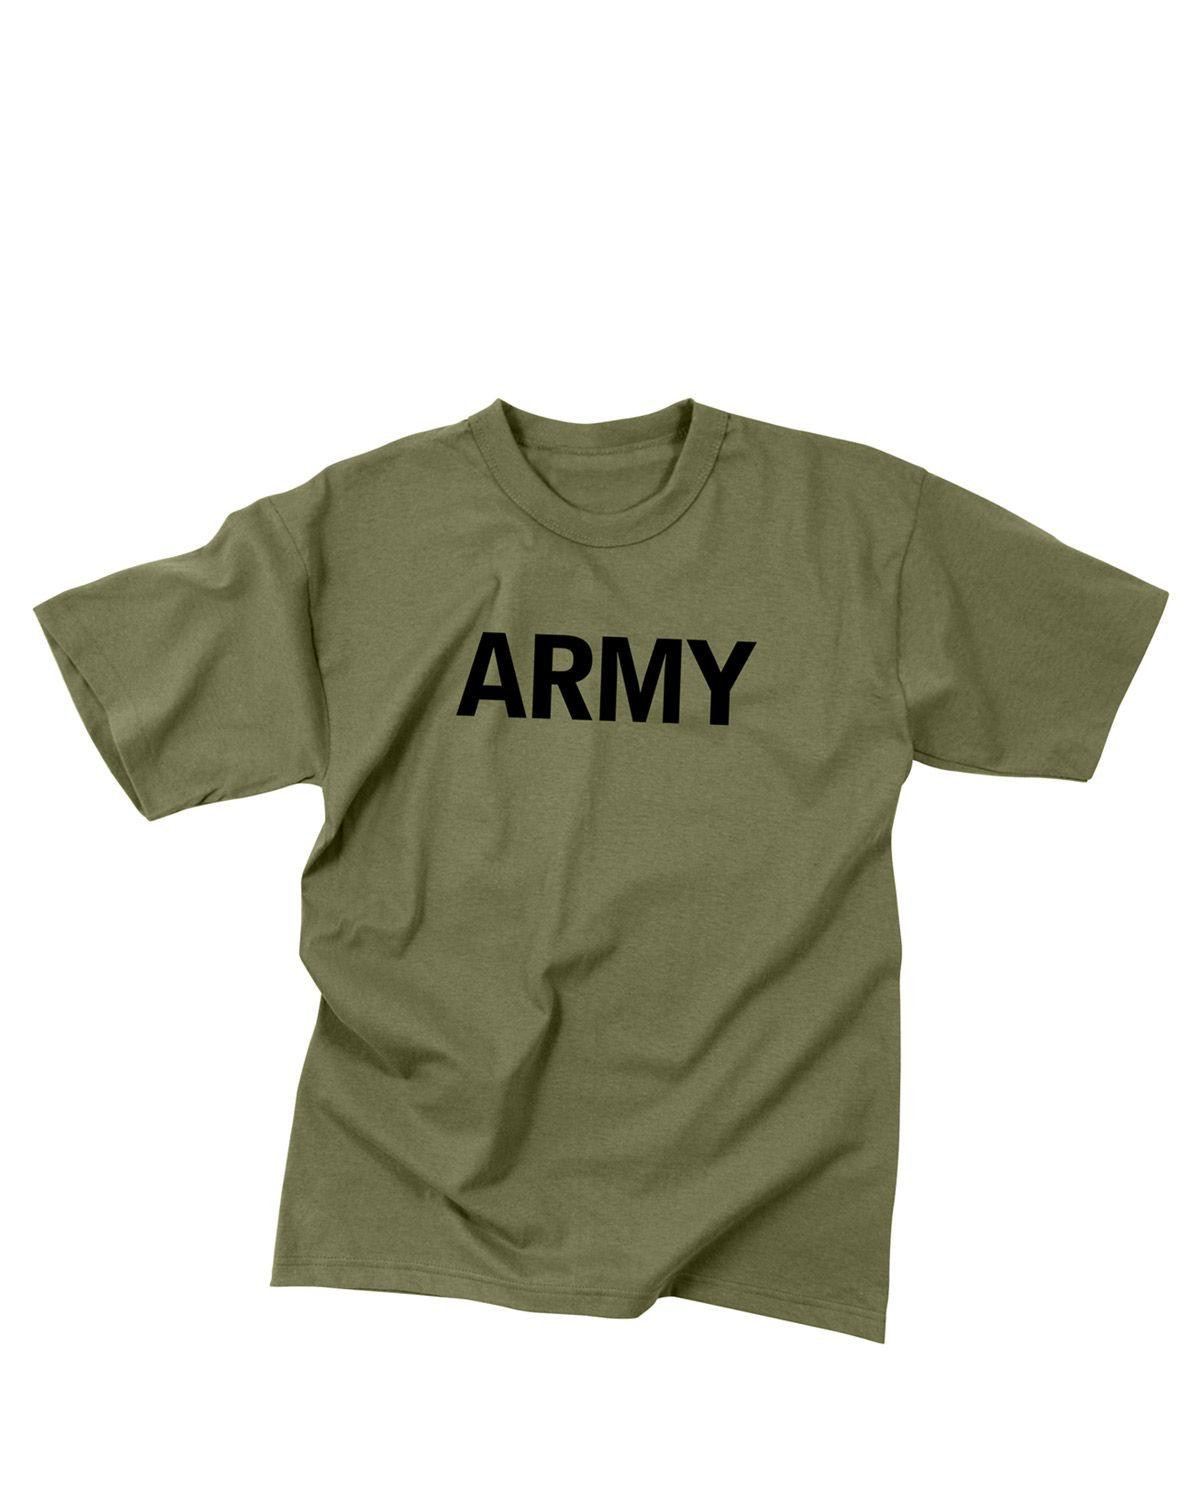 Rothco Physical Training T-shirt (Oliven m. ARMY, 2XL)